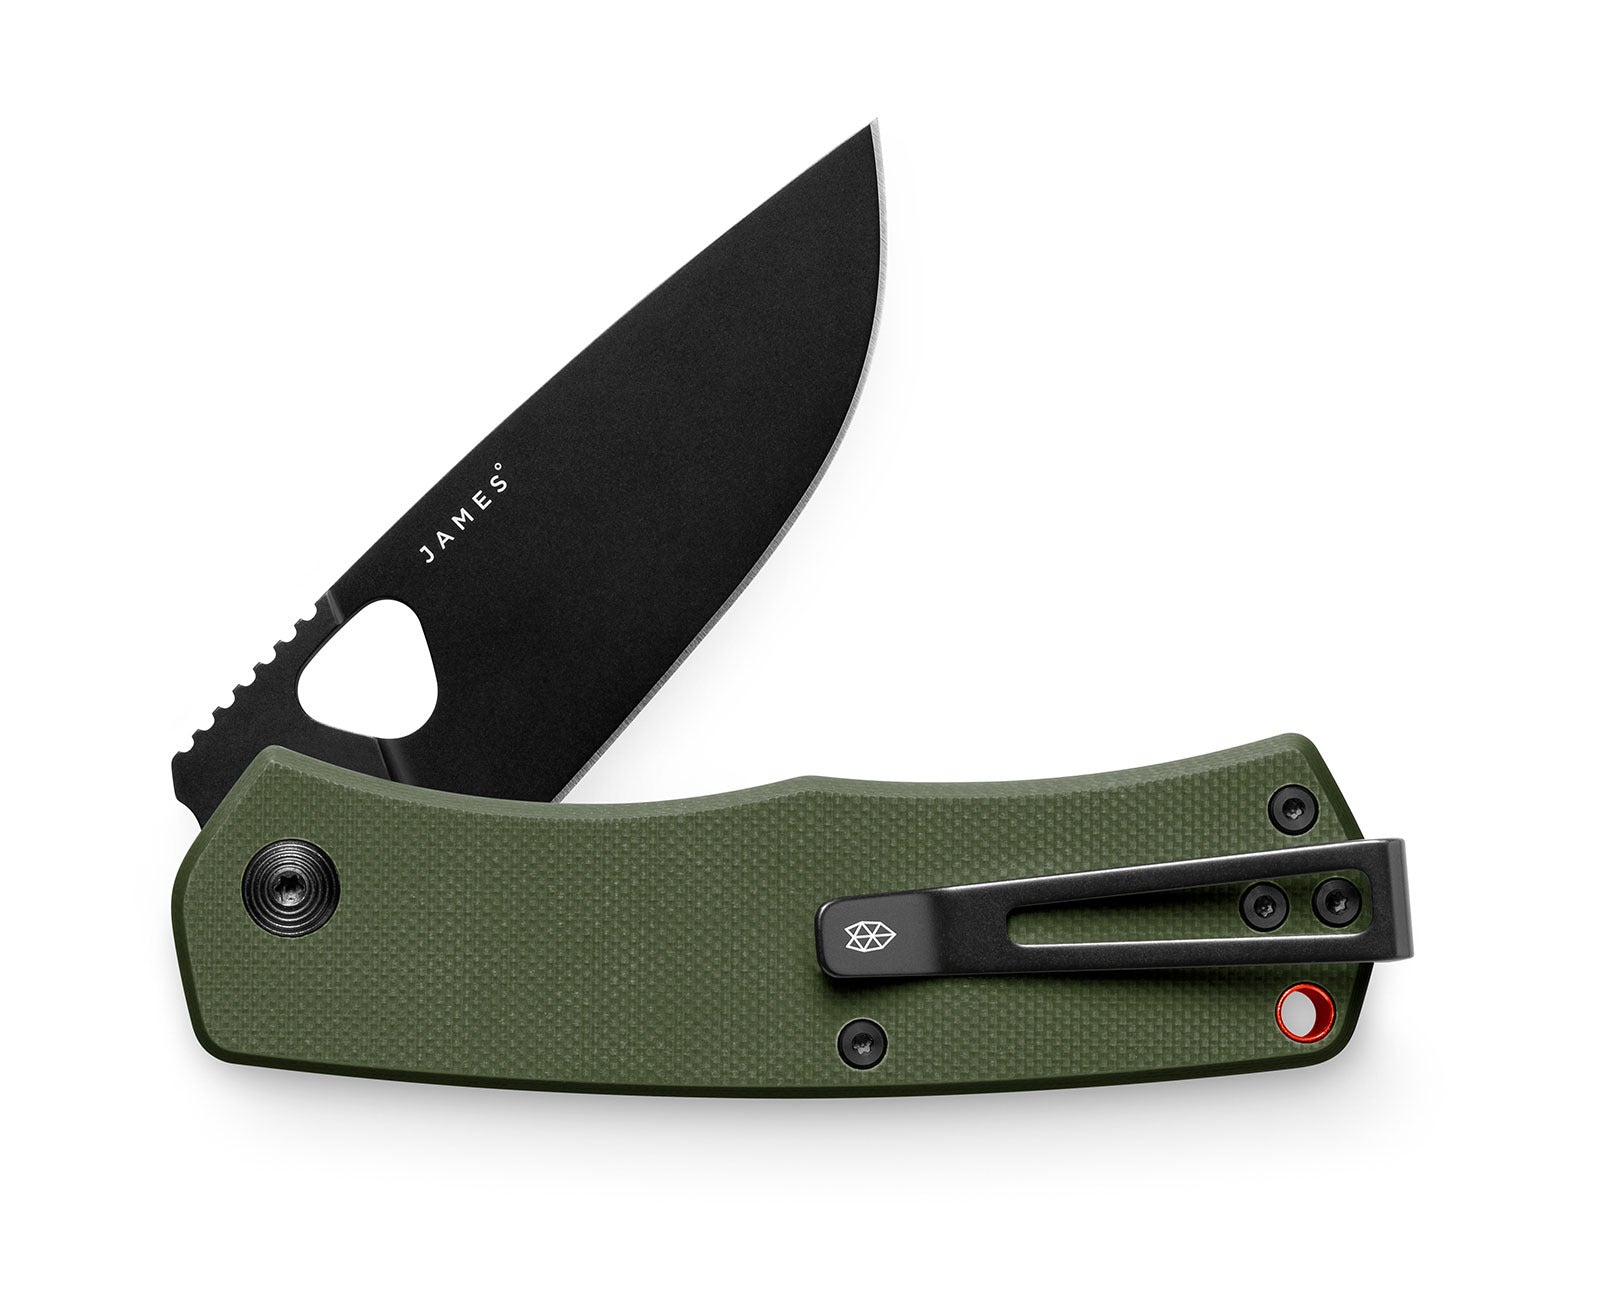 The James Brand's Palmer Is a Modern Utility Knife